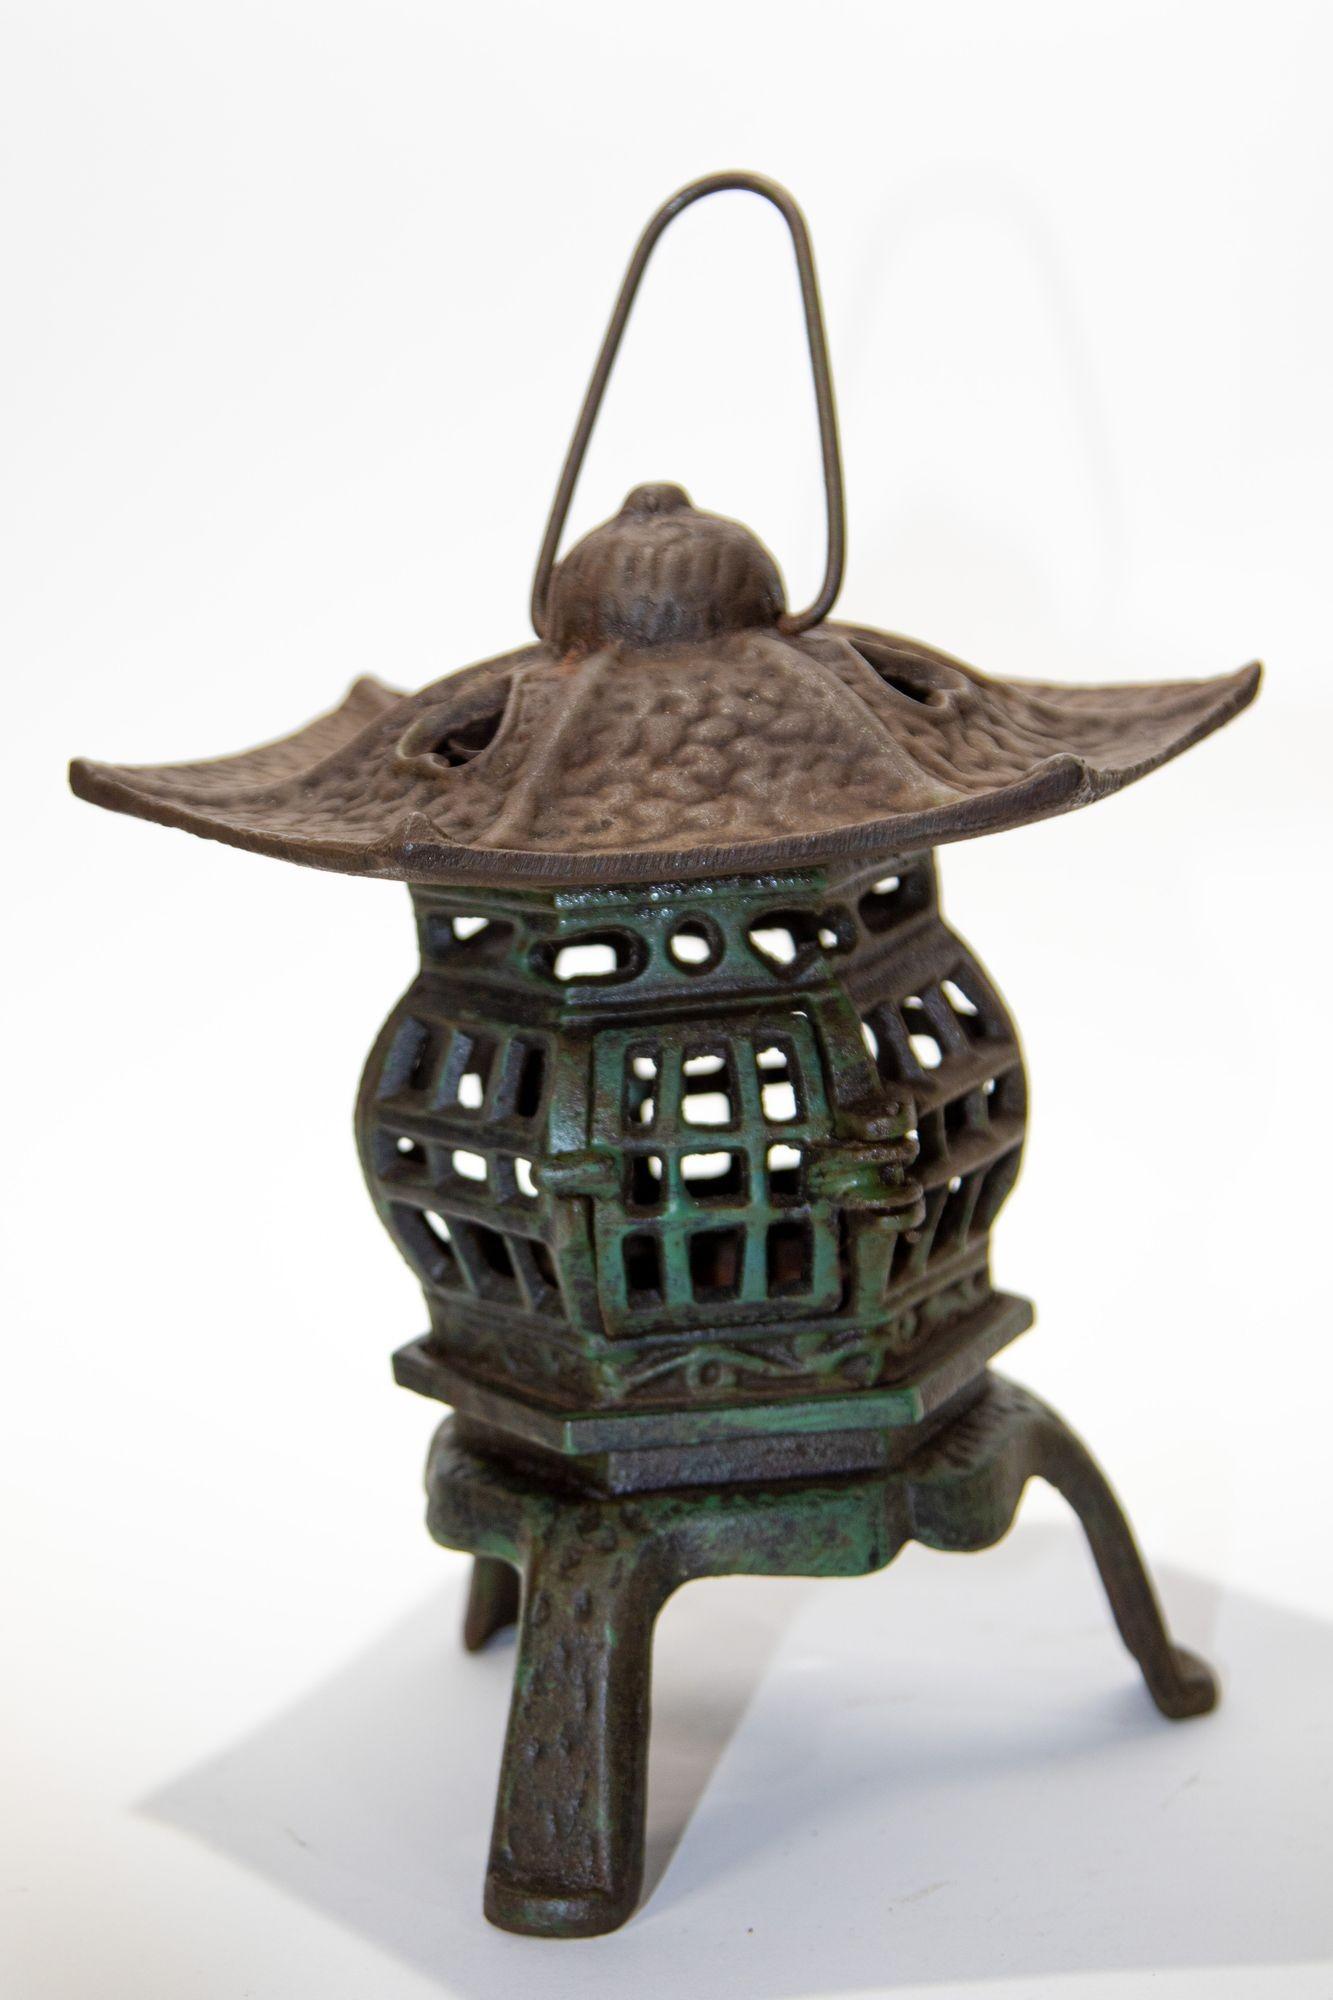 Japanese iron pagoda garden candle lantern.
Hand cast iron Japanese candle lantern with hearts on top.
Can rest on table or hanged by loop
Measures: Height to top of loop 13